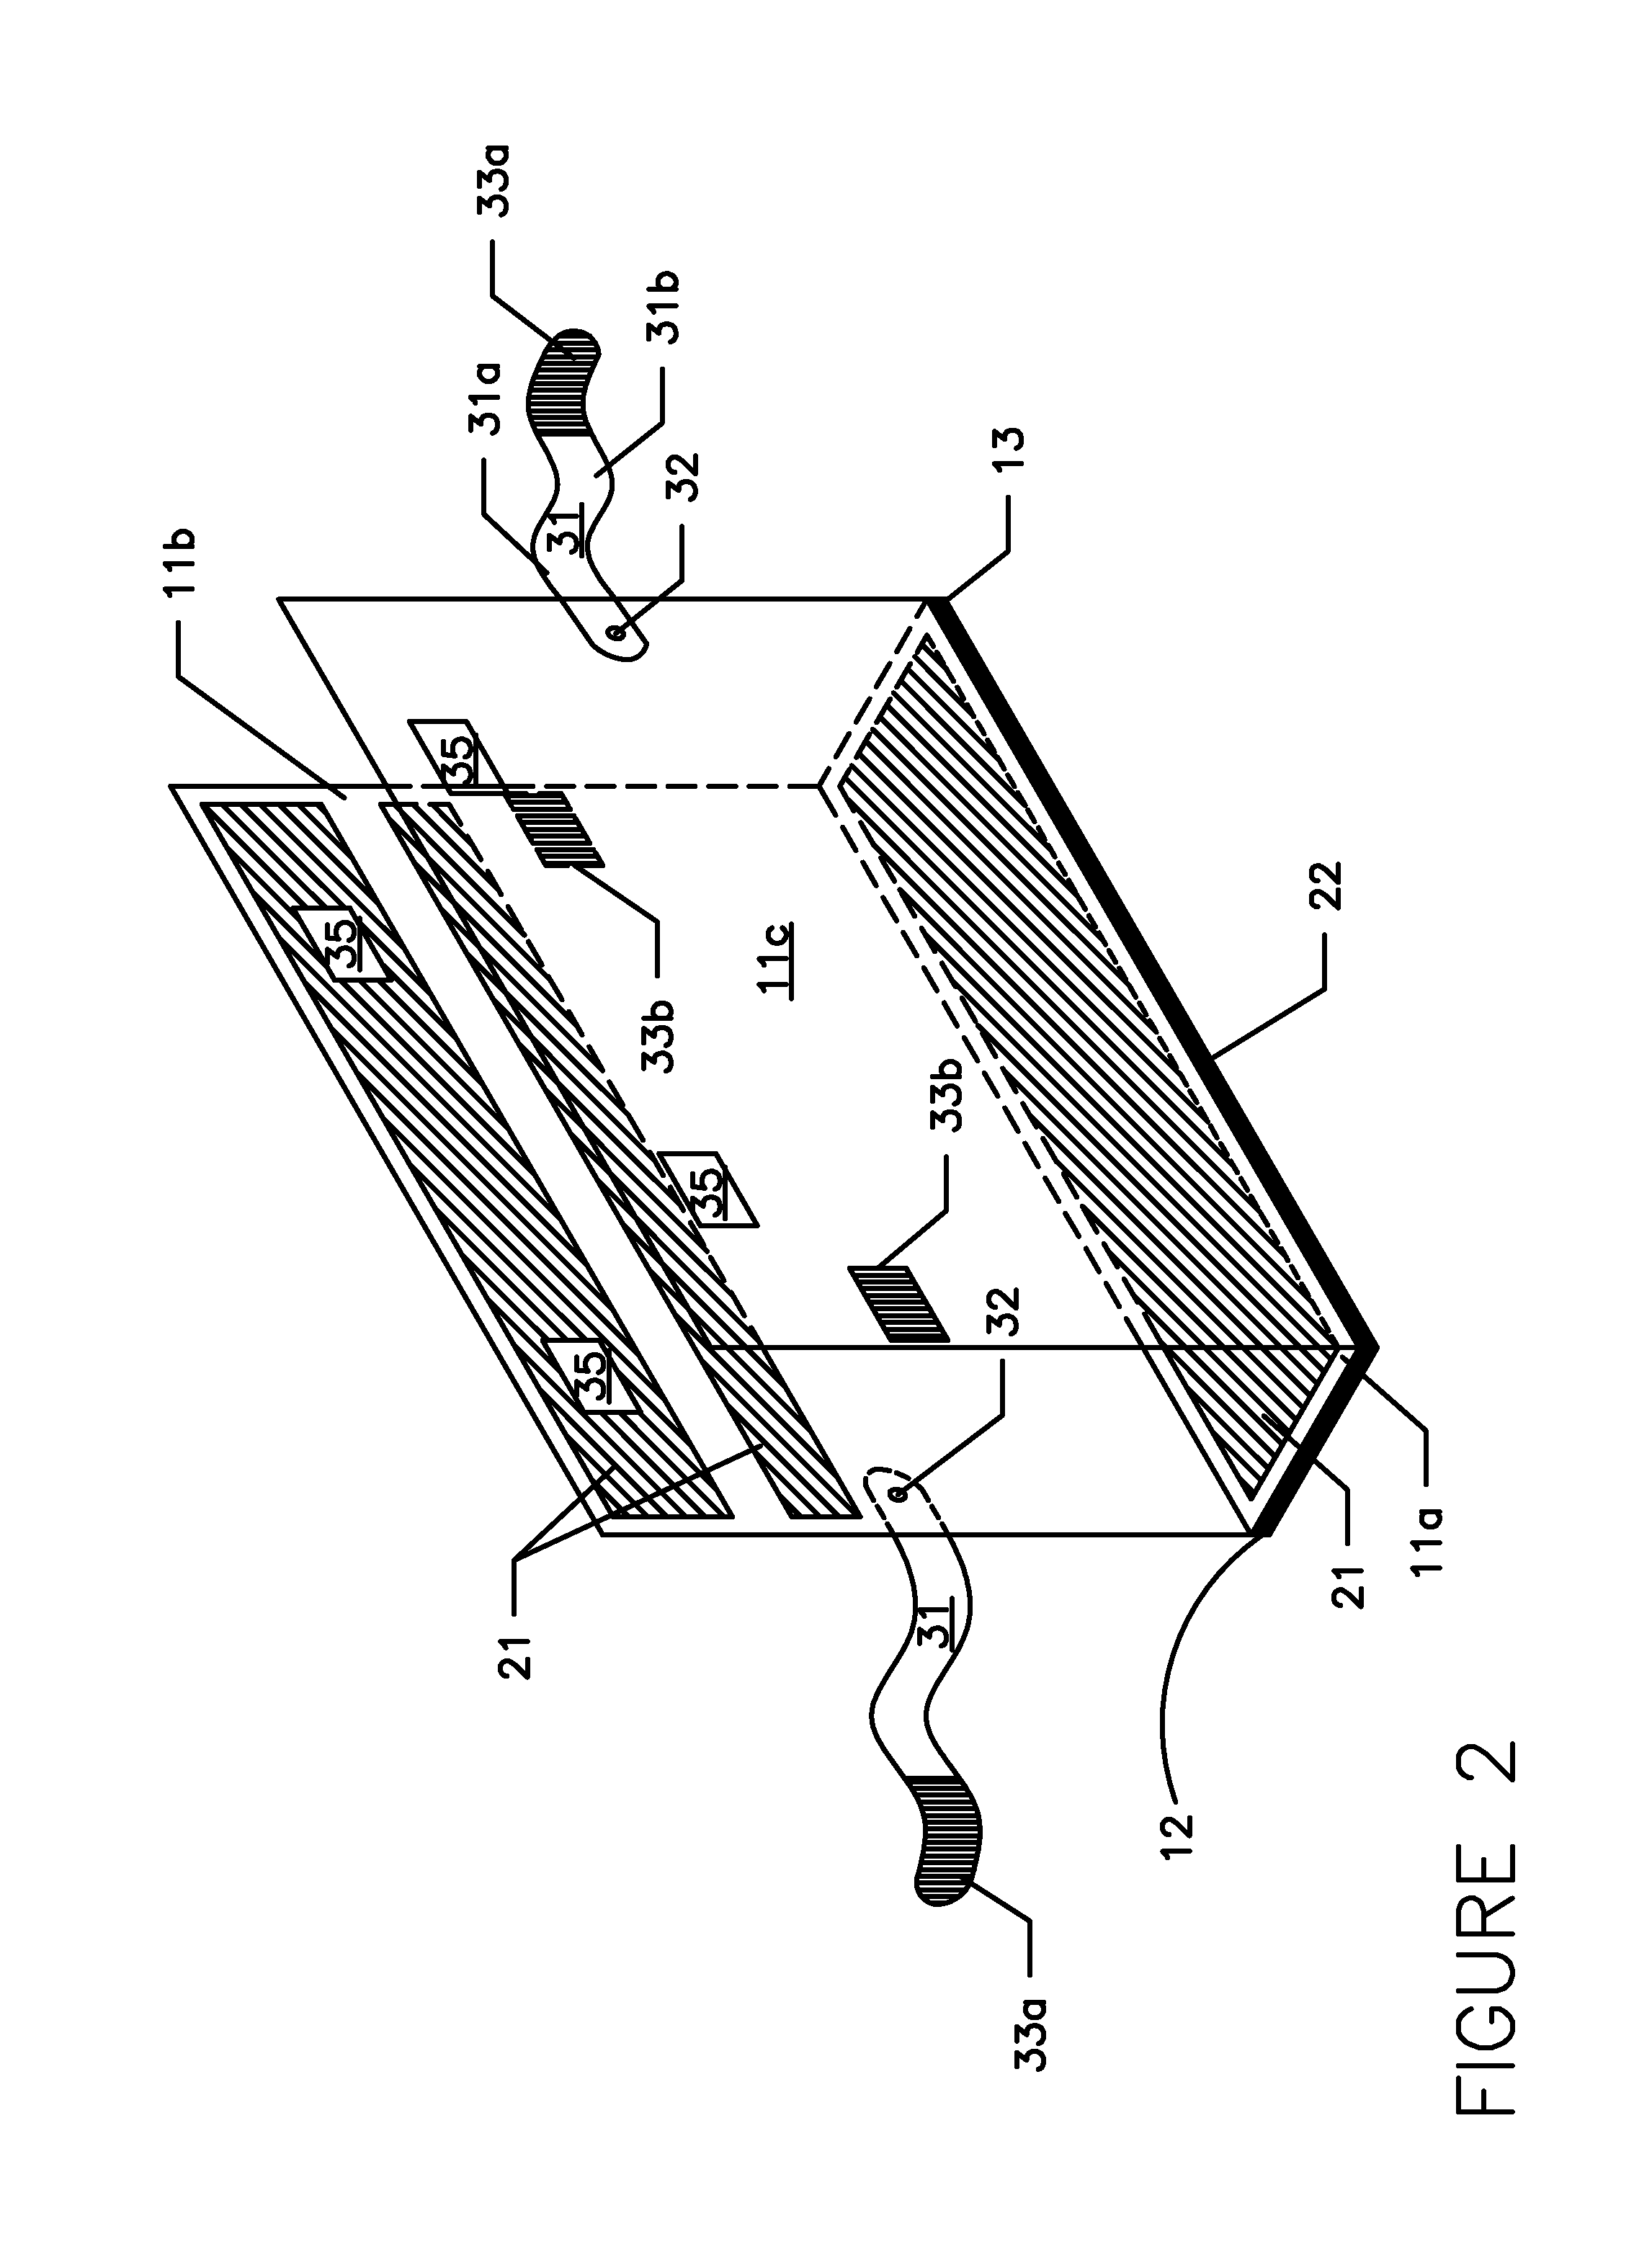 Protective enclosure for transporting an automobile door